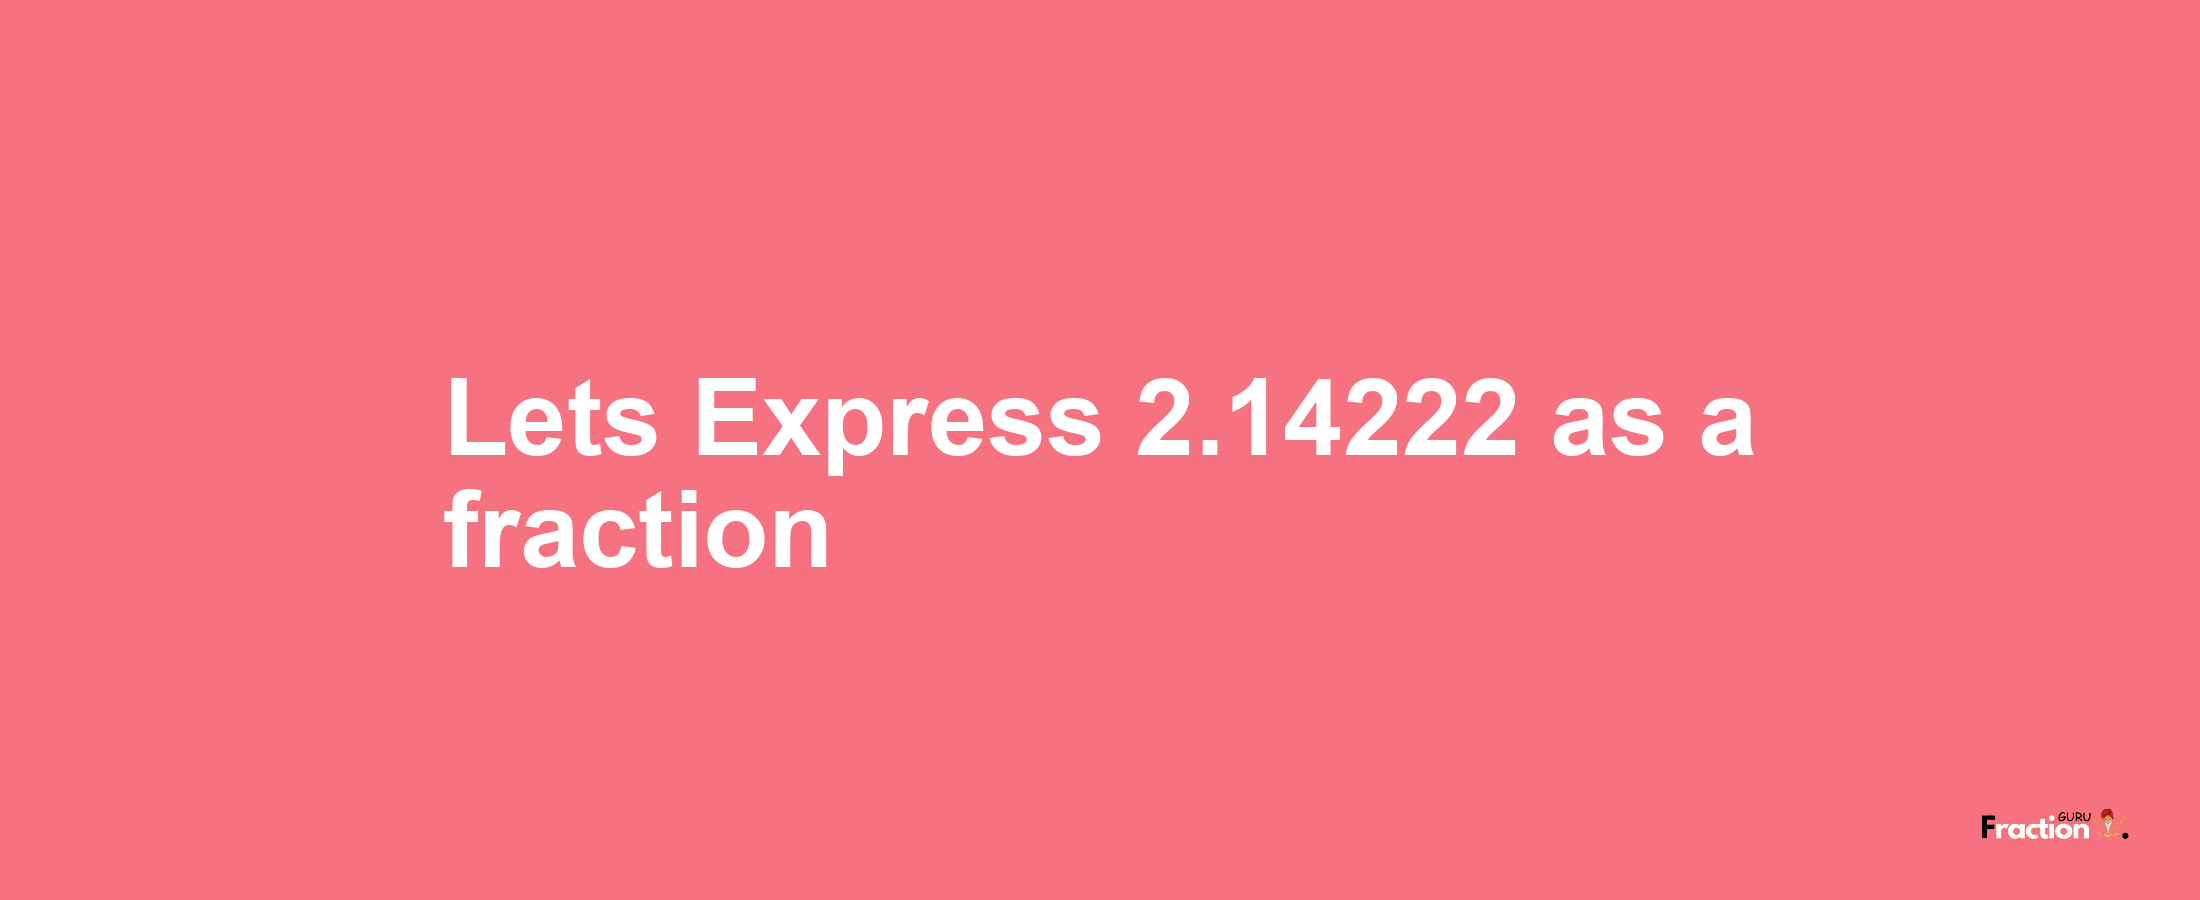 Lets Express 2.14222 as afraction